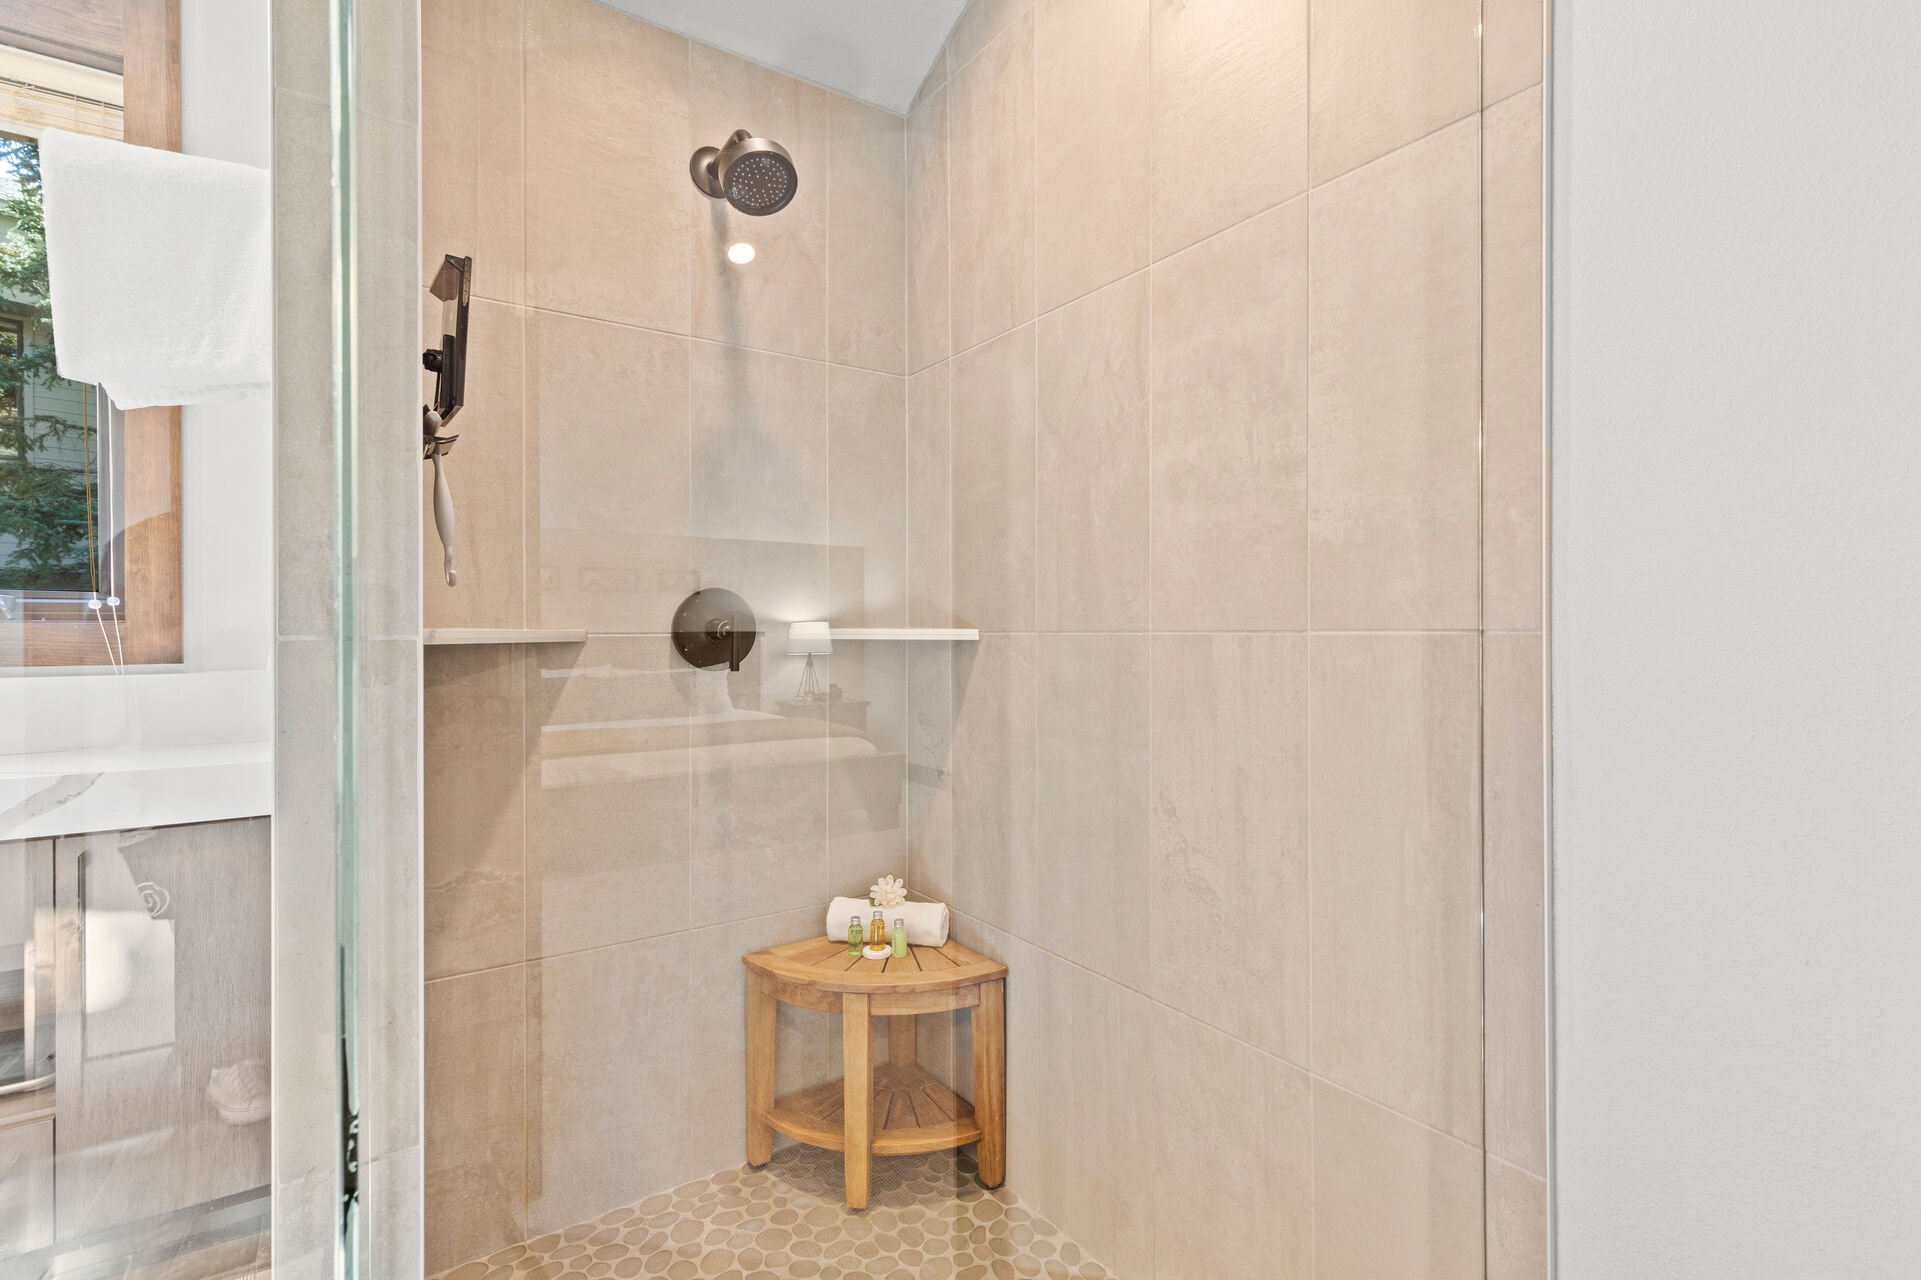 Master Bathroom with stunning wrap-around vanity and large tile and glass shower